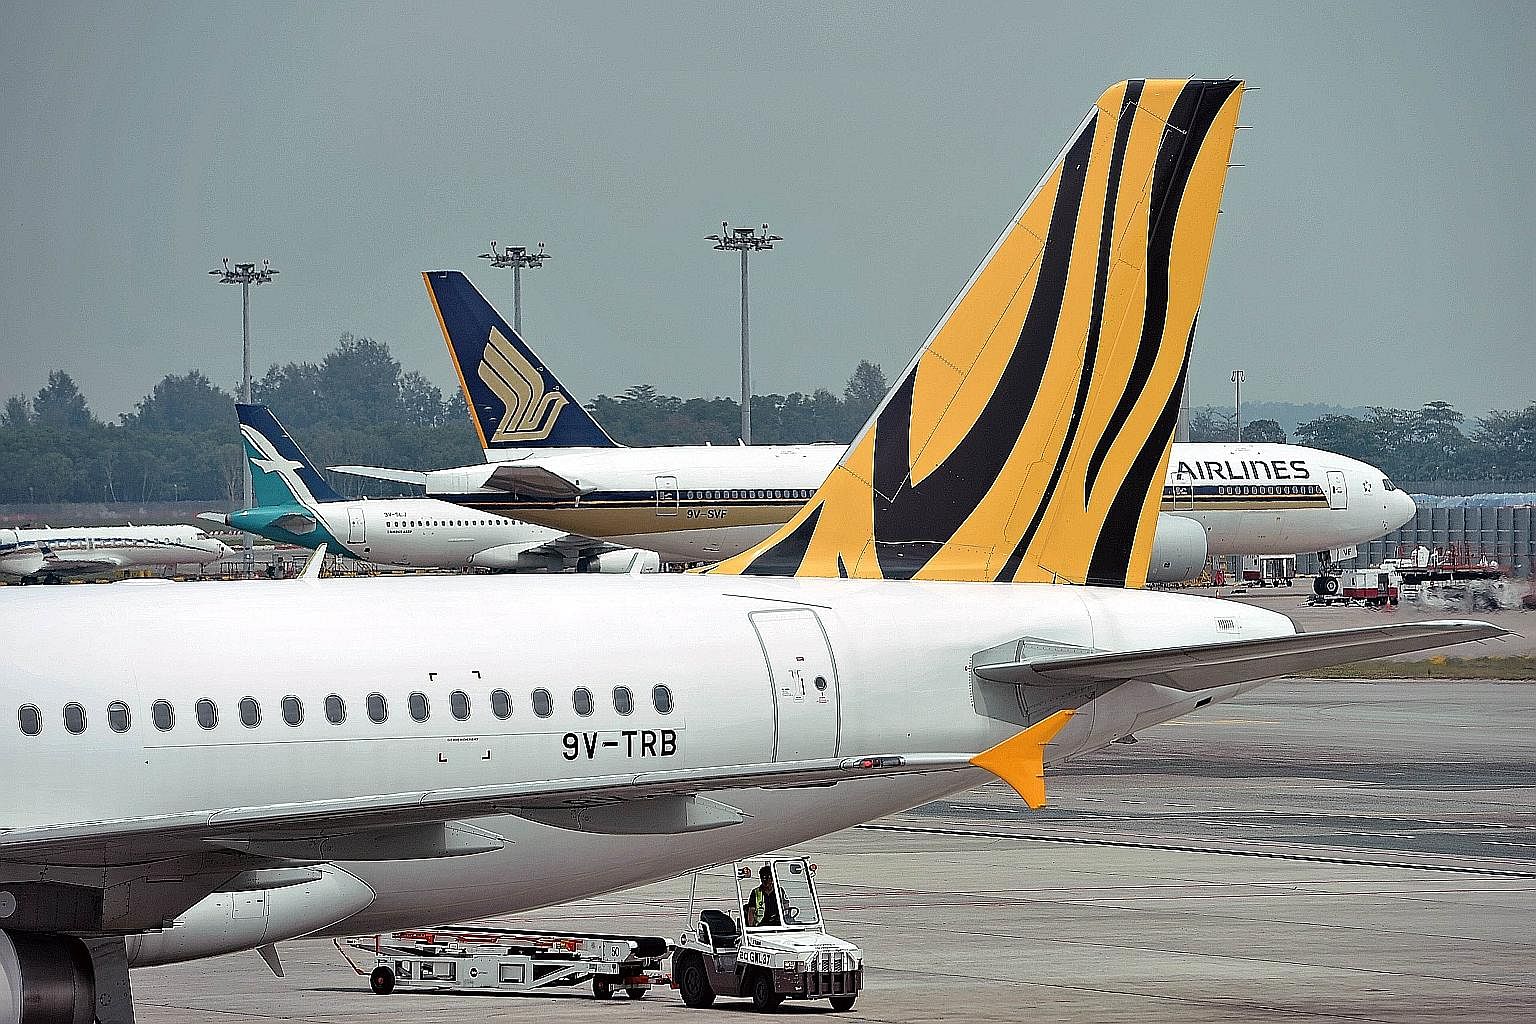 Brand differentiation could become more challenging for SIA with its takeover offer for Tigerair.